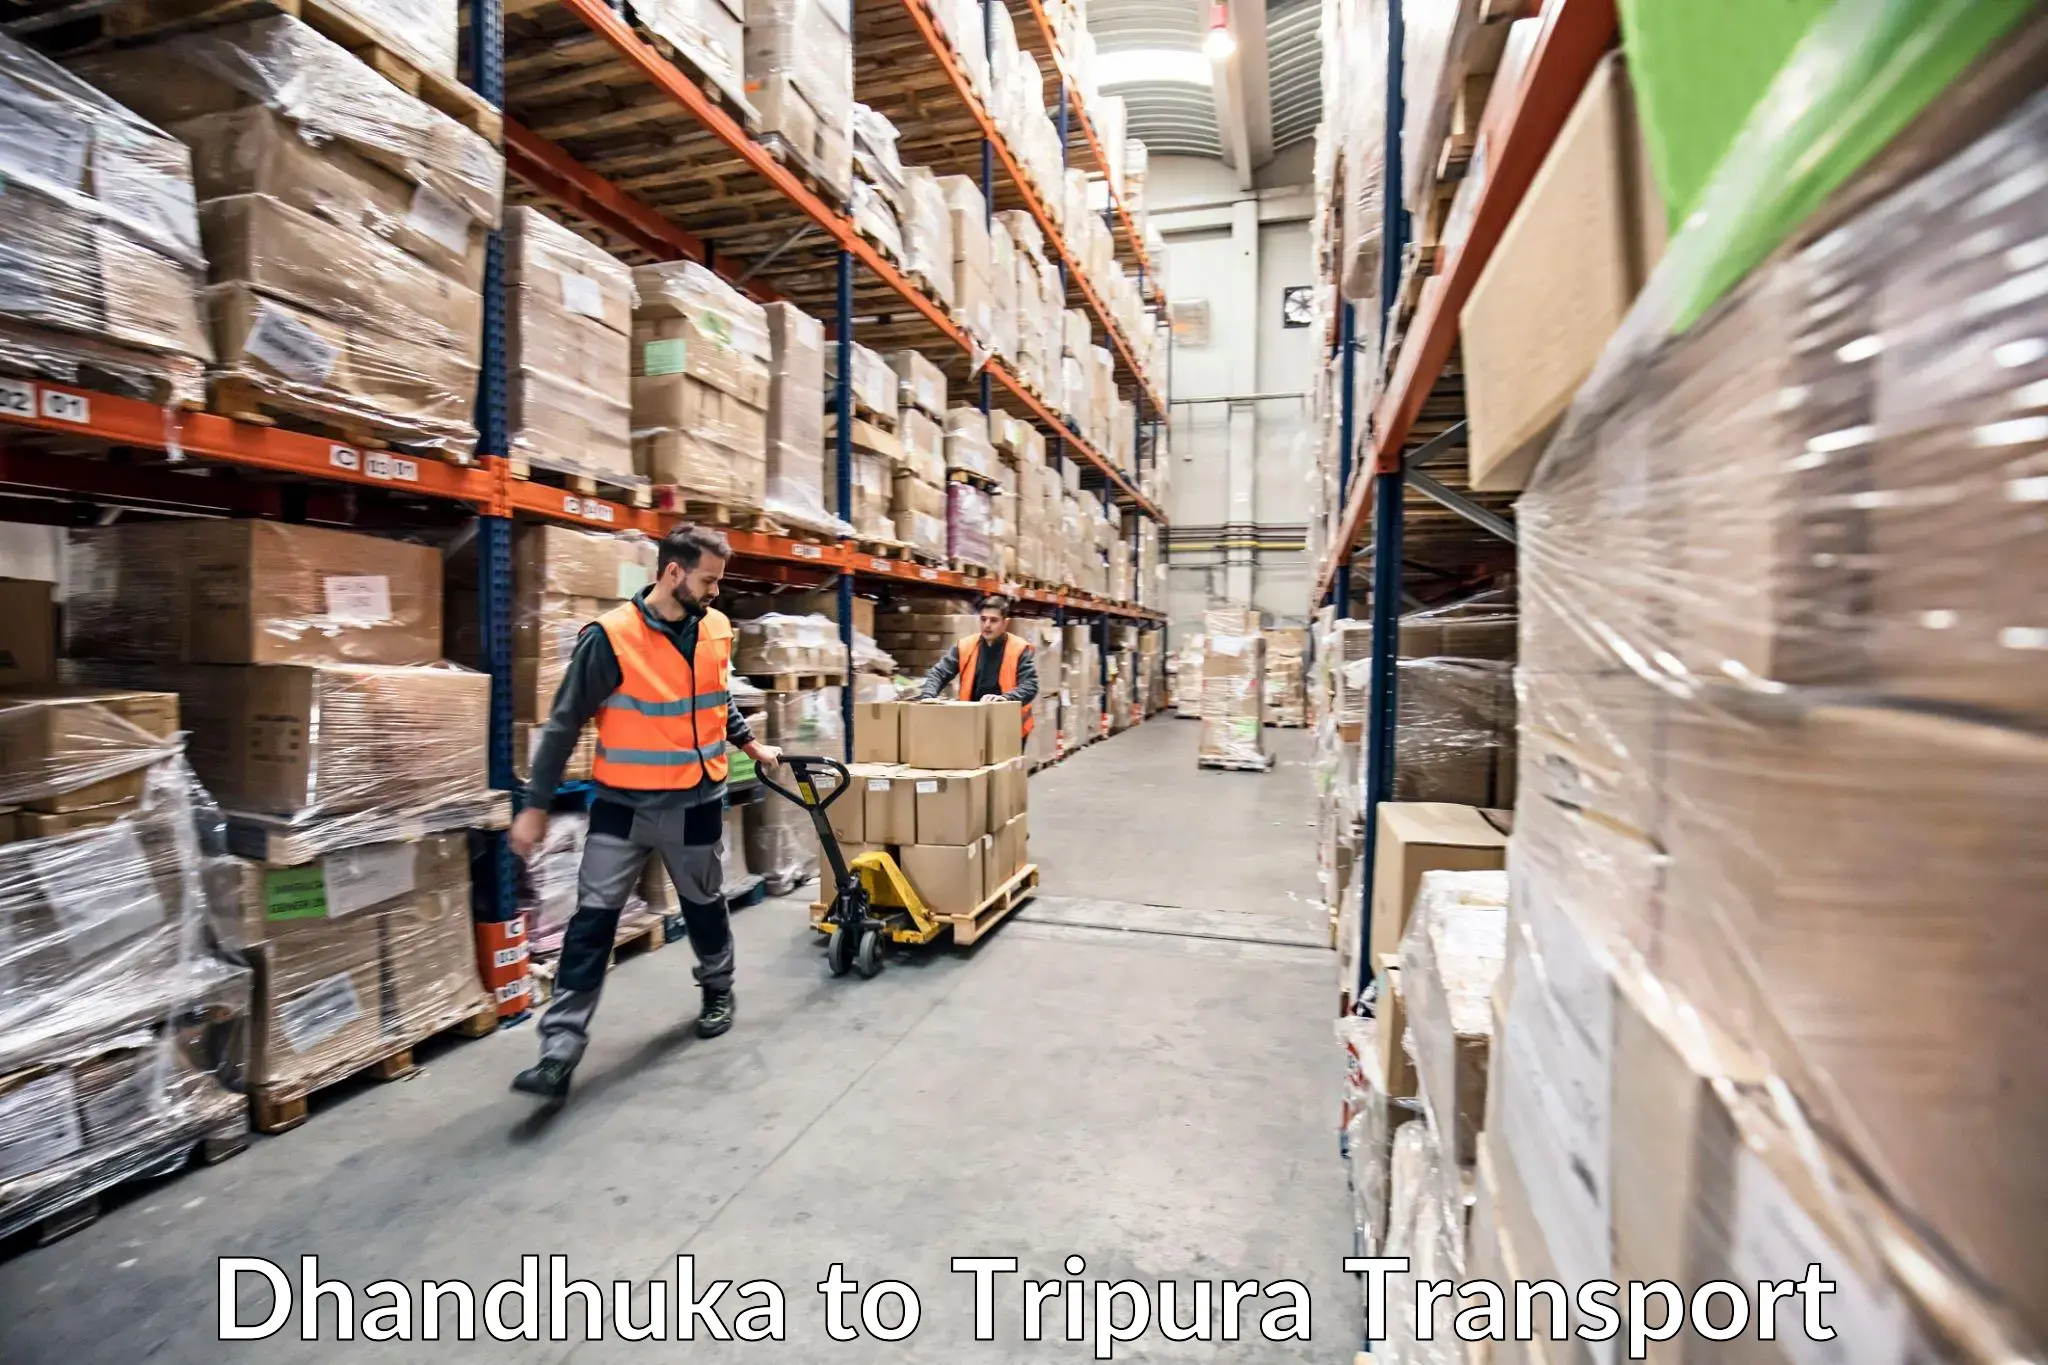 Container transport service Dhandhuka to Udaipur Tripura